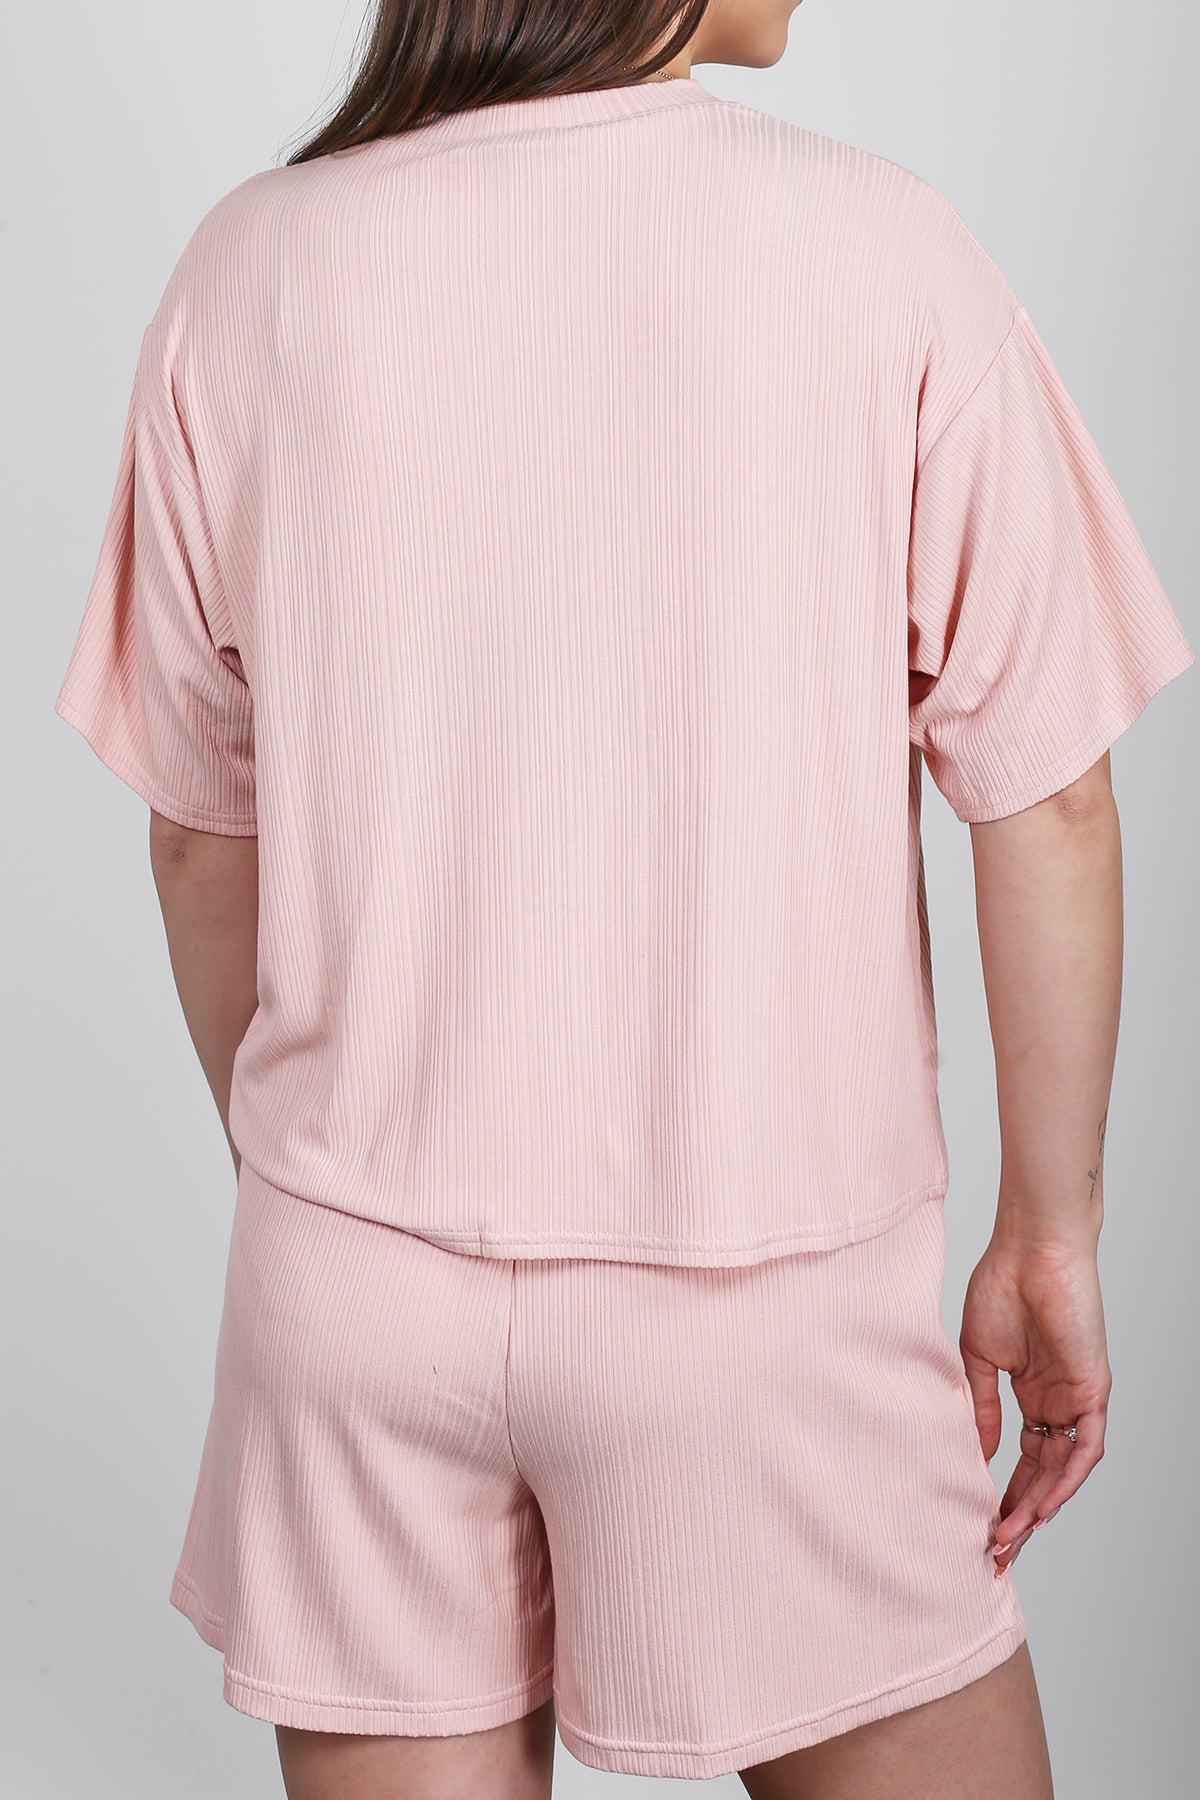 RIBBED SHORT IN SOFT PEACH